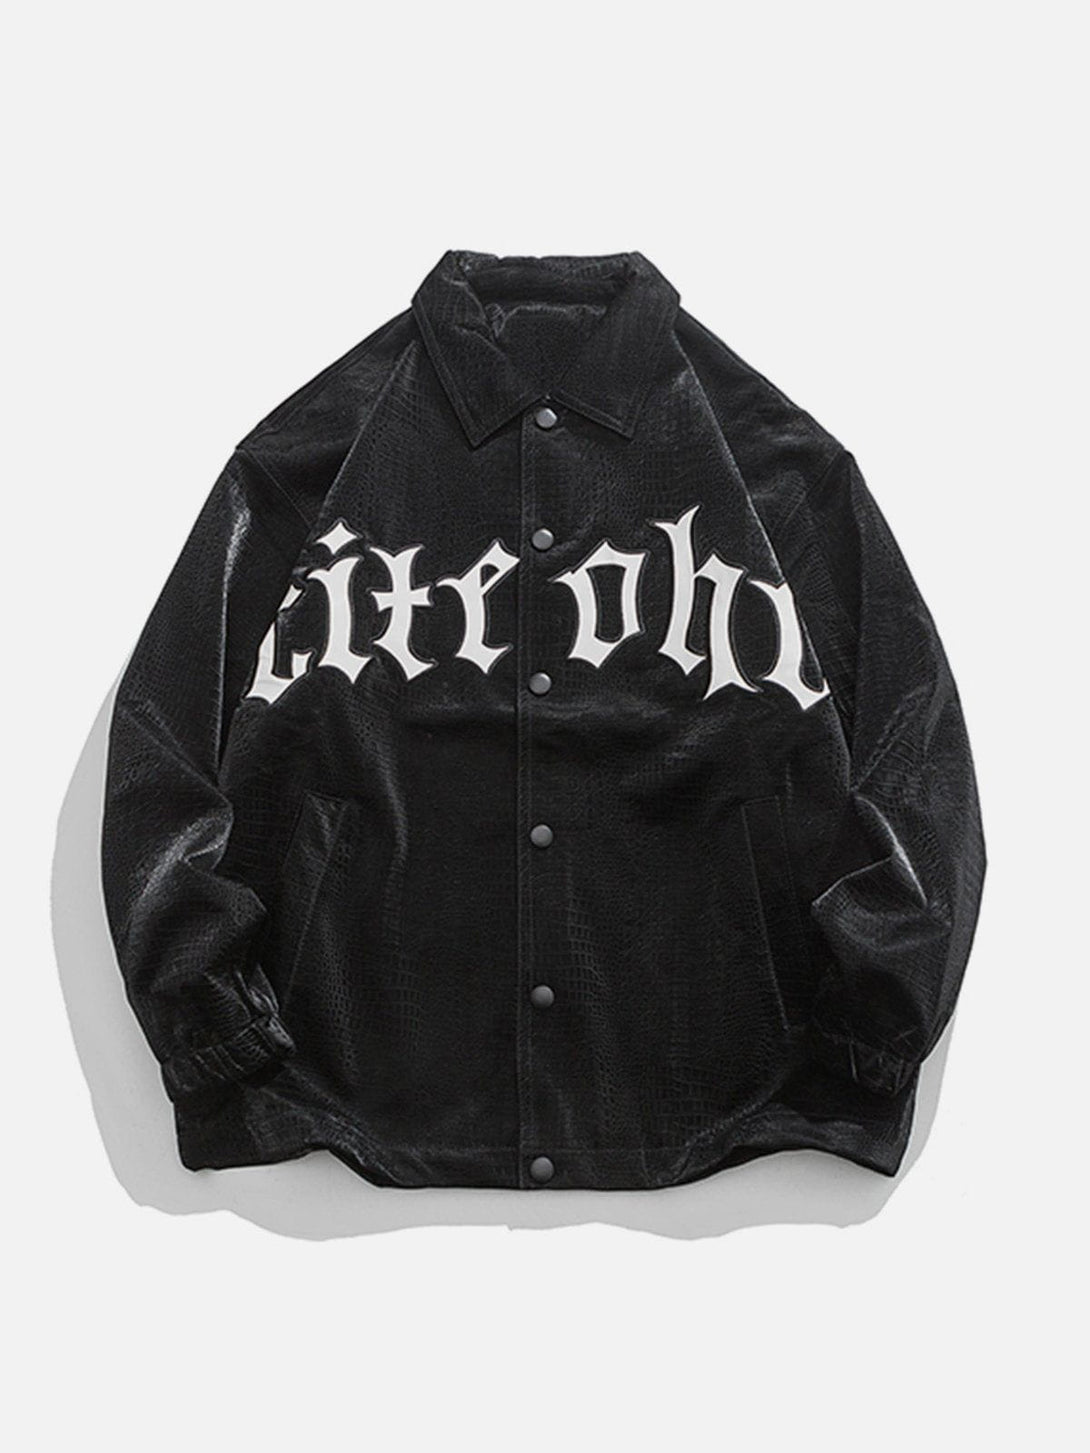 Ellesey - Gothic Letter Embroidered Leather Jacket- Streetwear Fashion - ellesey.com